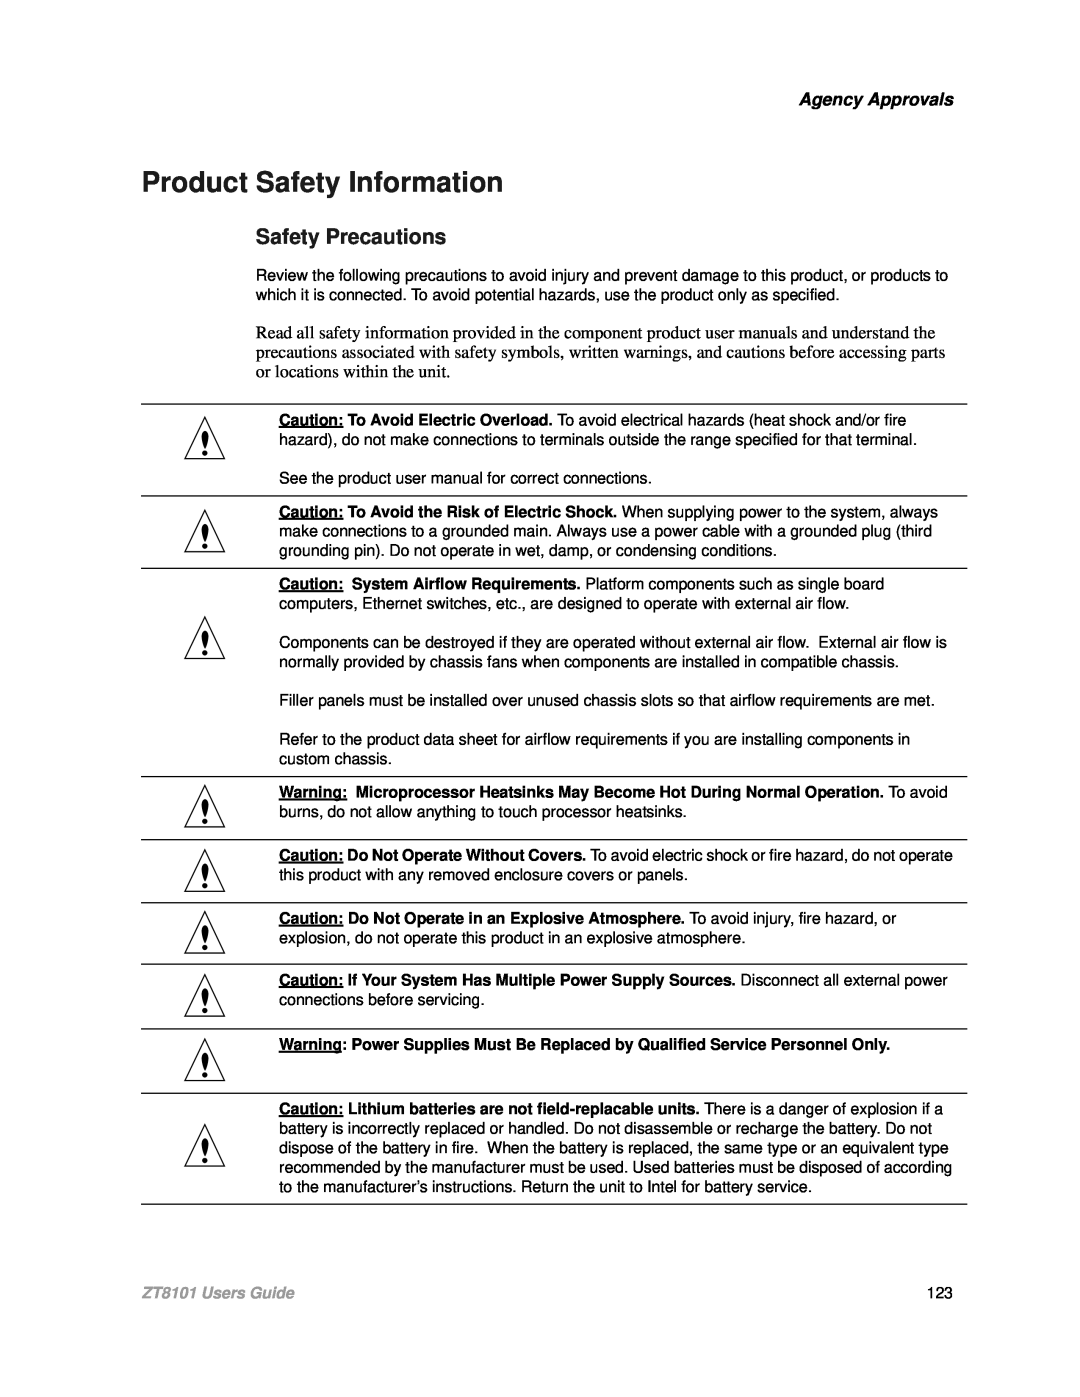 Intel user manual Product Safety Information, Safety Precautions, Agency Approvals, ZT8101 Users Guide 